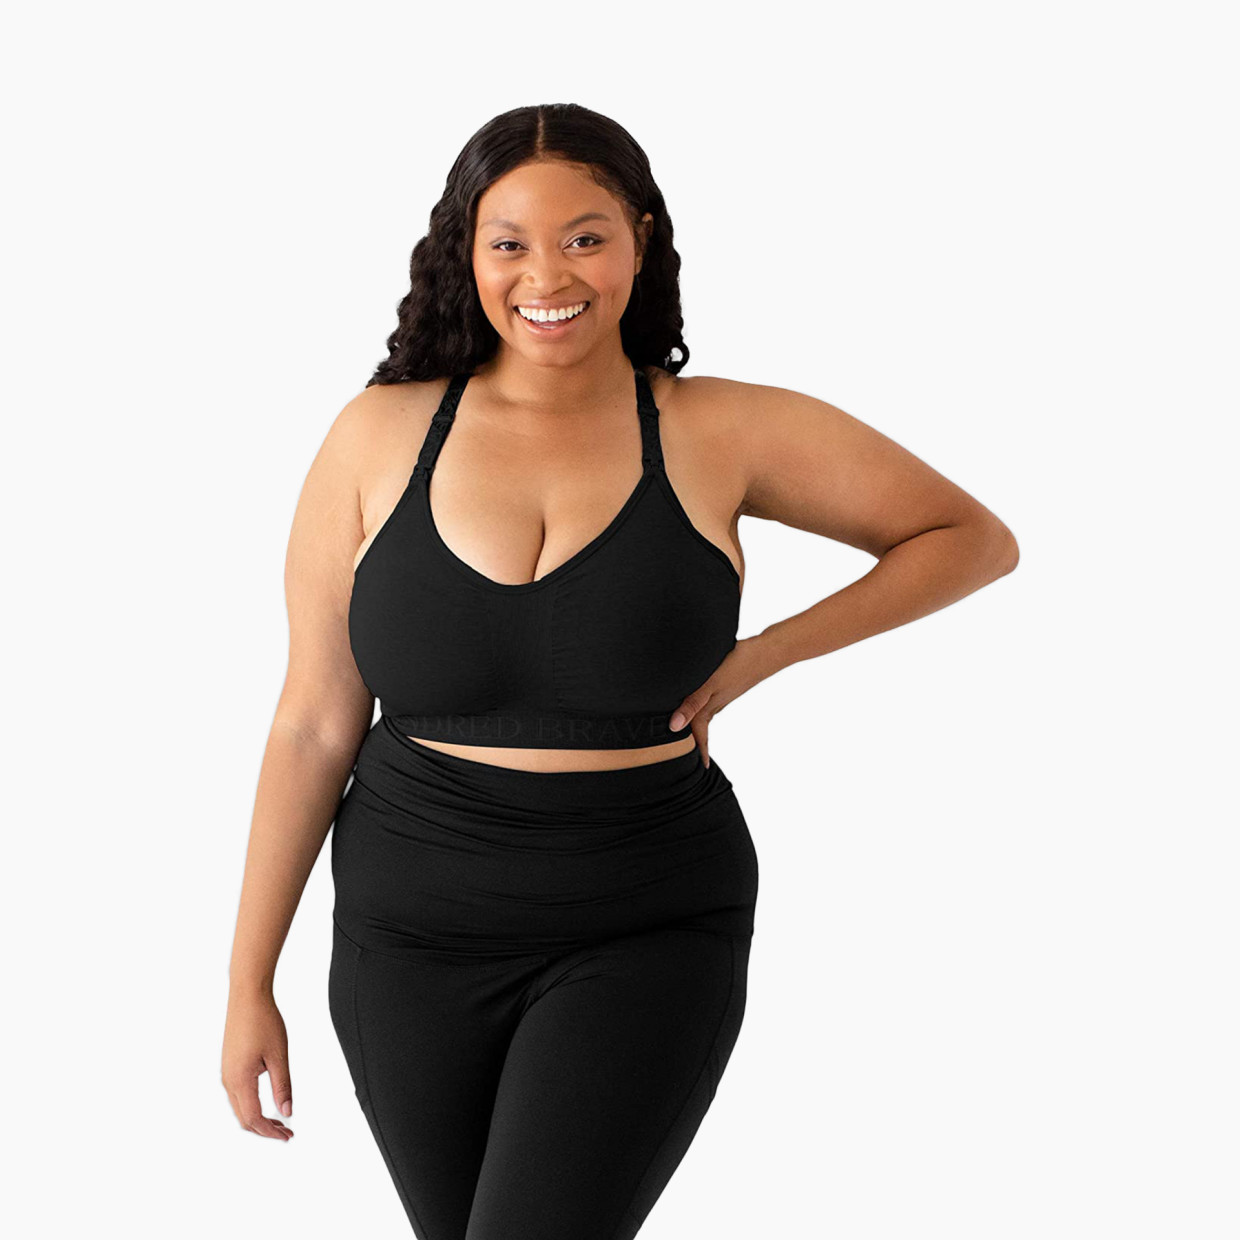 Kindred Bravely Sublime Support Low Impact Nursing & Maternity Sports Bra - Black, X-Large-Busty.